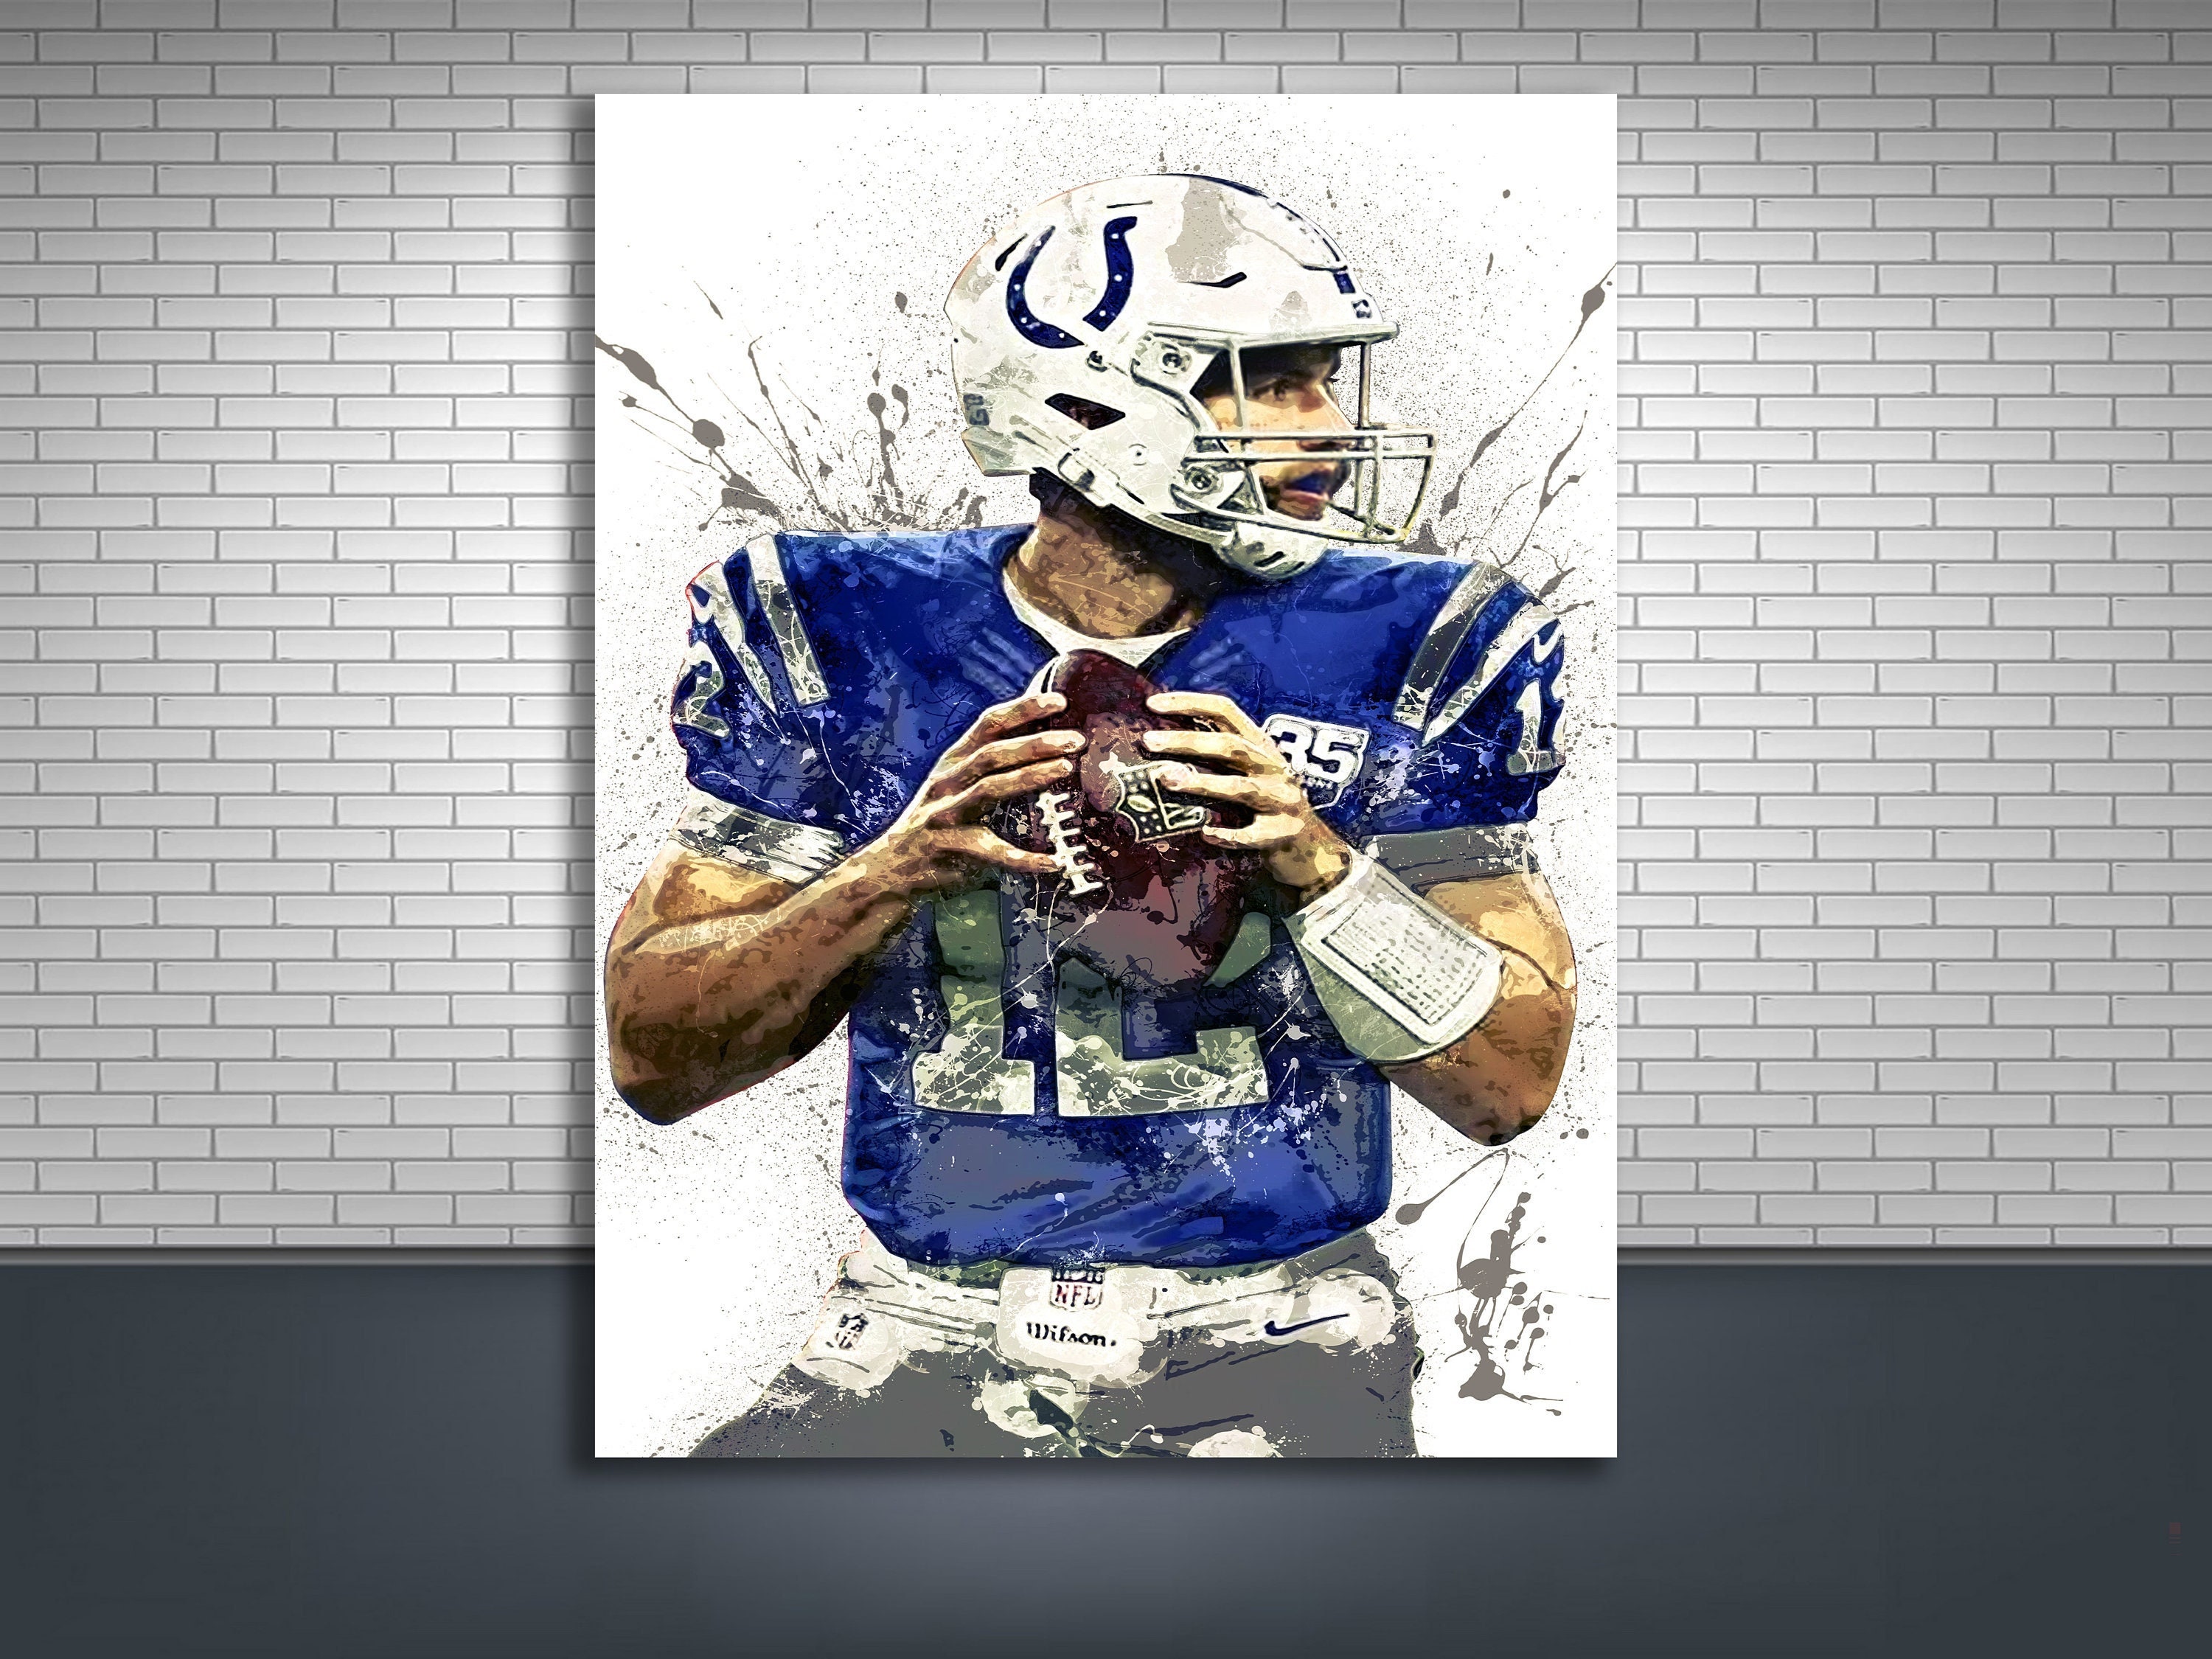 Andrew Luck Poster - Indianapolis Colts - Canvas Wrap, Man Cave, Bar, Game Room, Kids Room